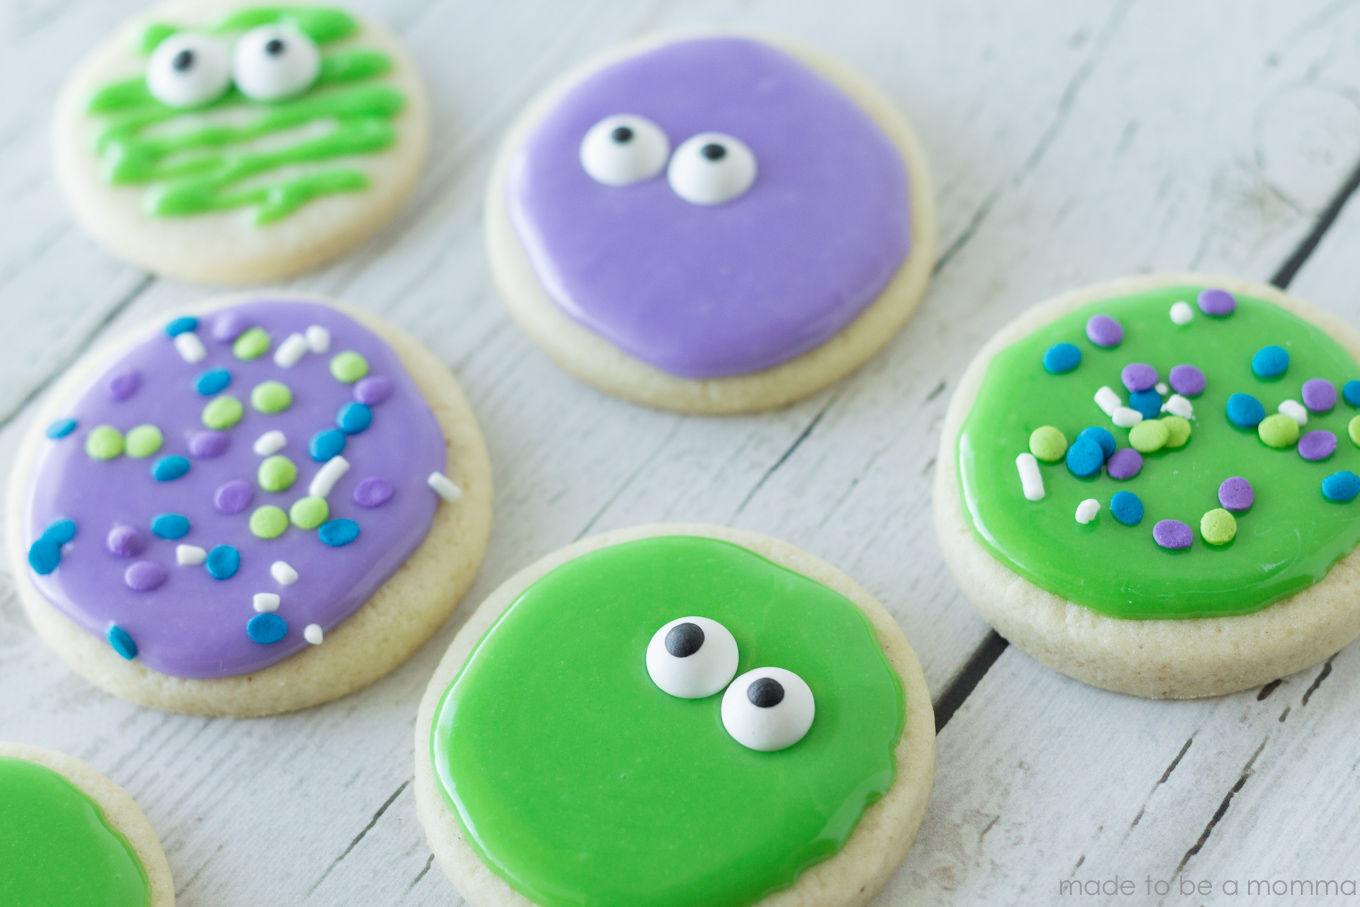 These Googly-Eyed Sugar Cookies are simple and great for any spooky celebration.